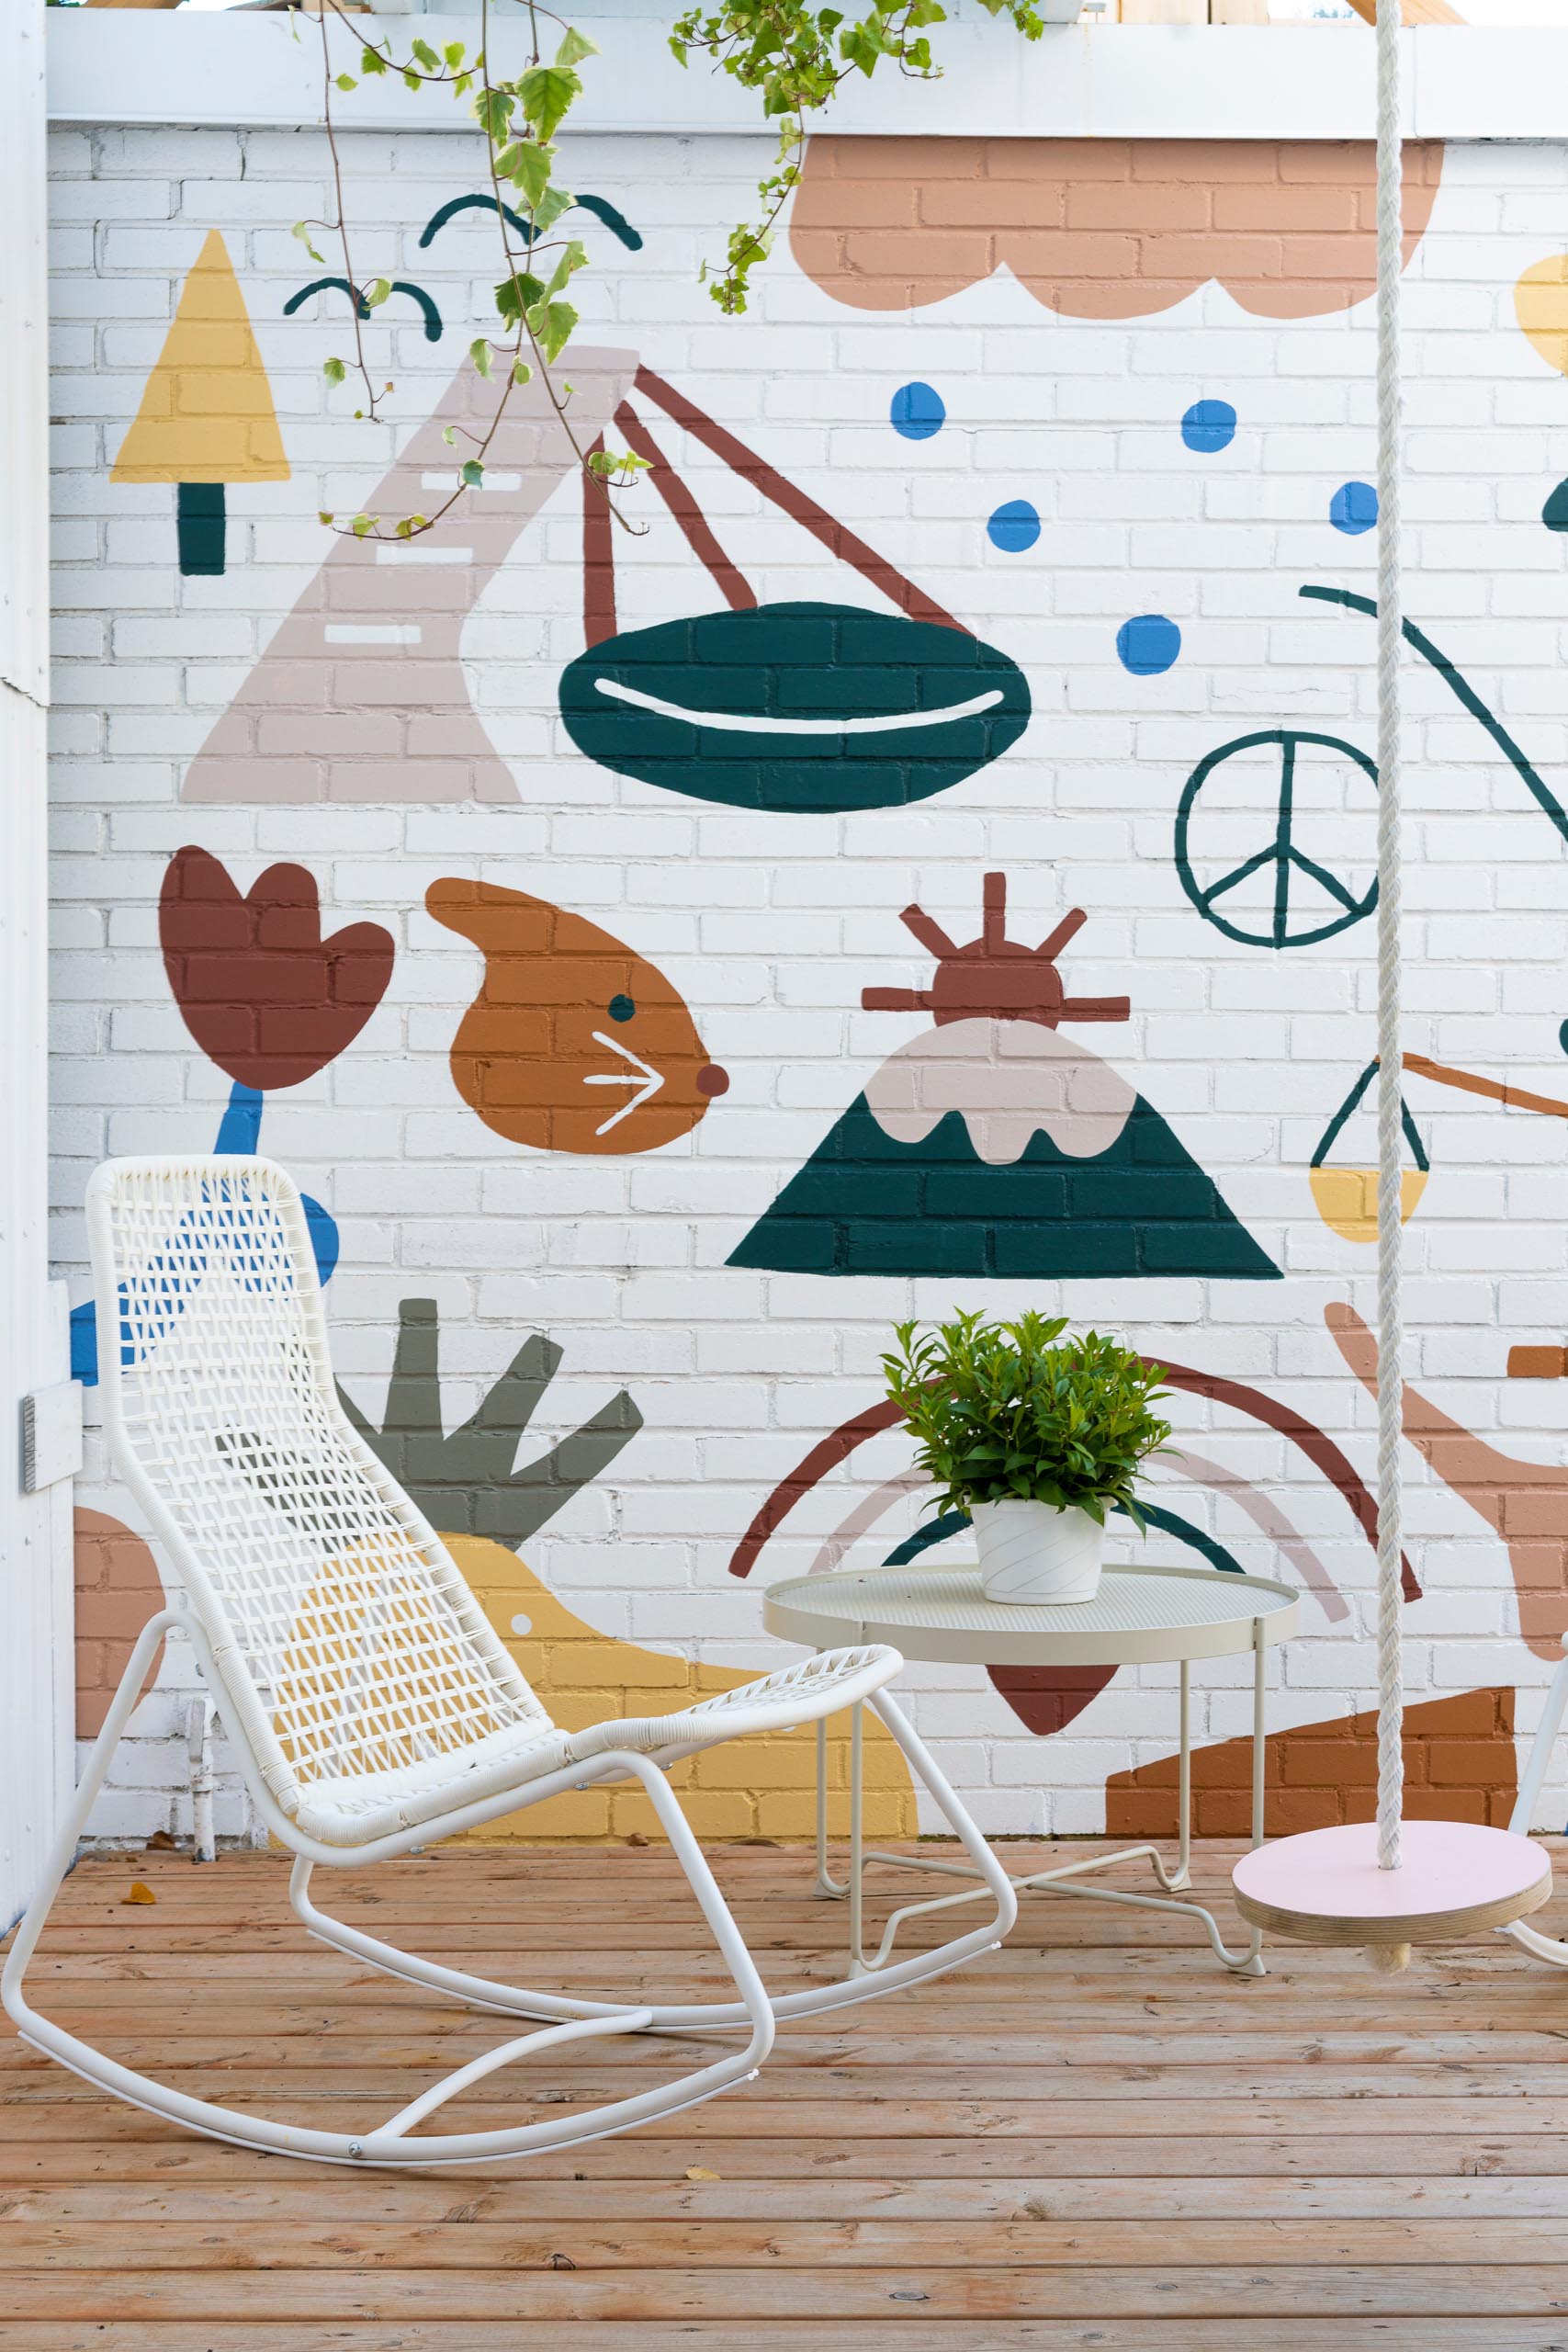 A modern and private courtyard with a fun and colorful mural by artist Marc-Olivier Lamothe.